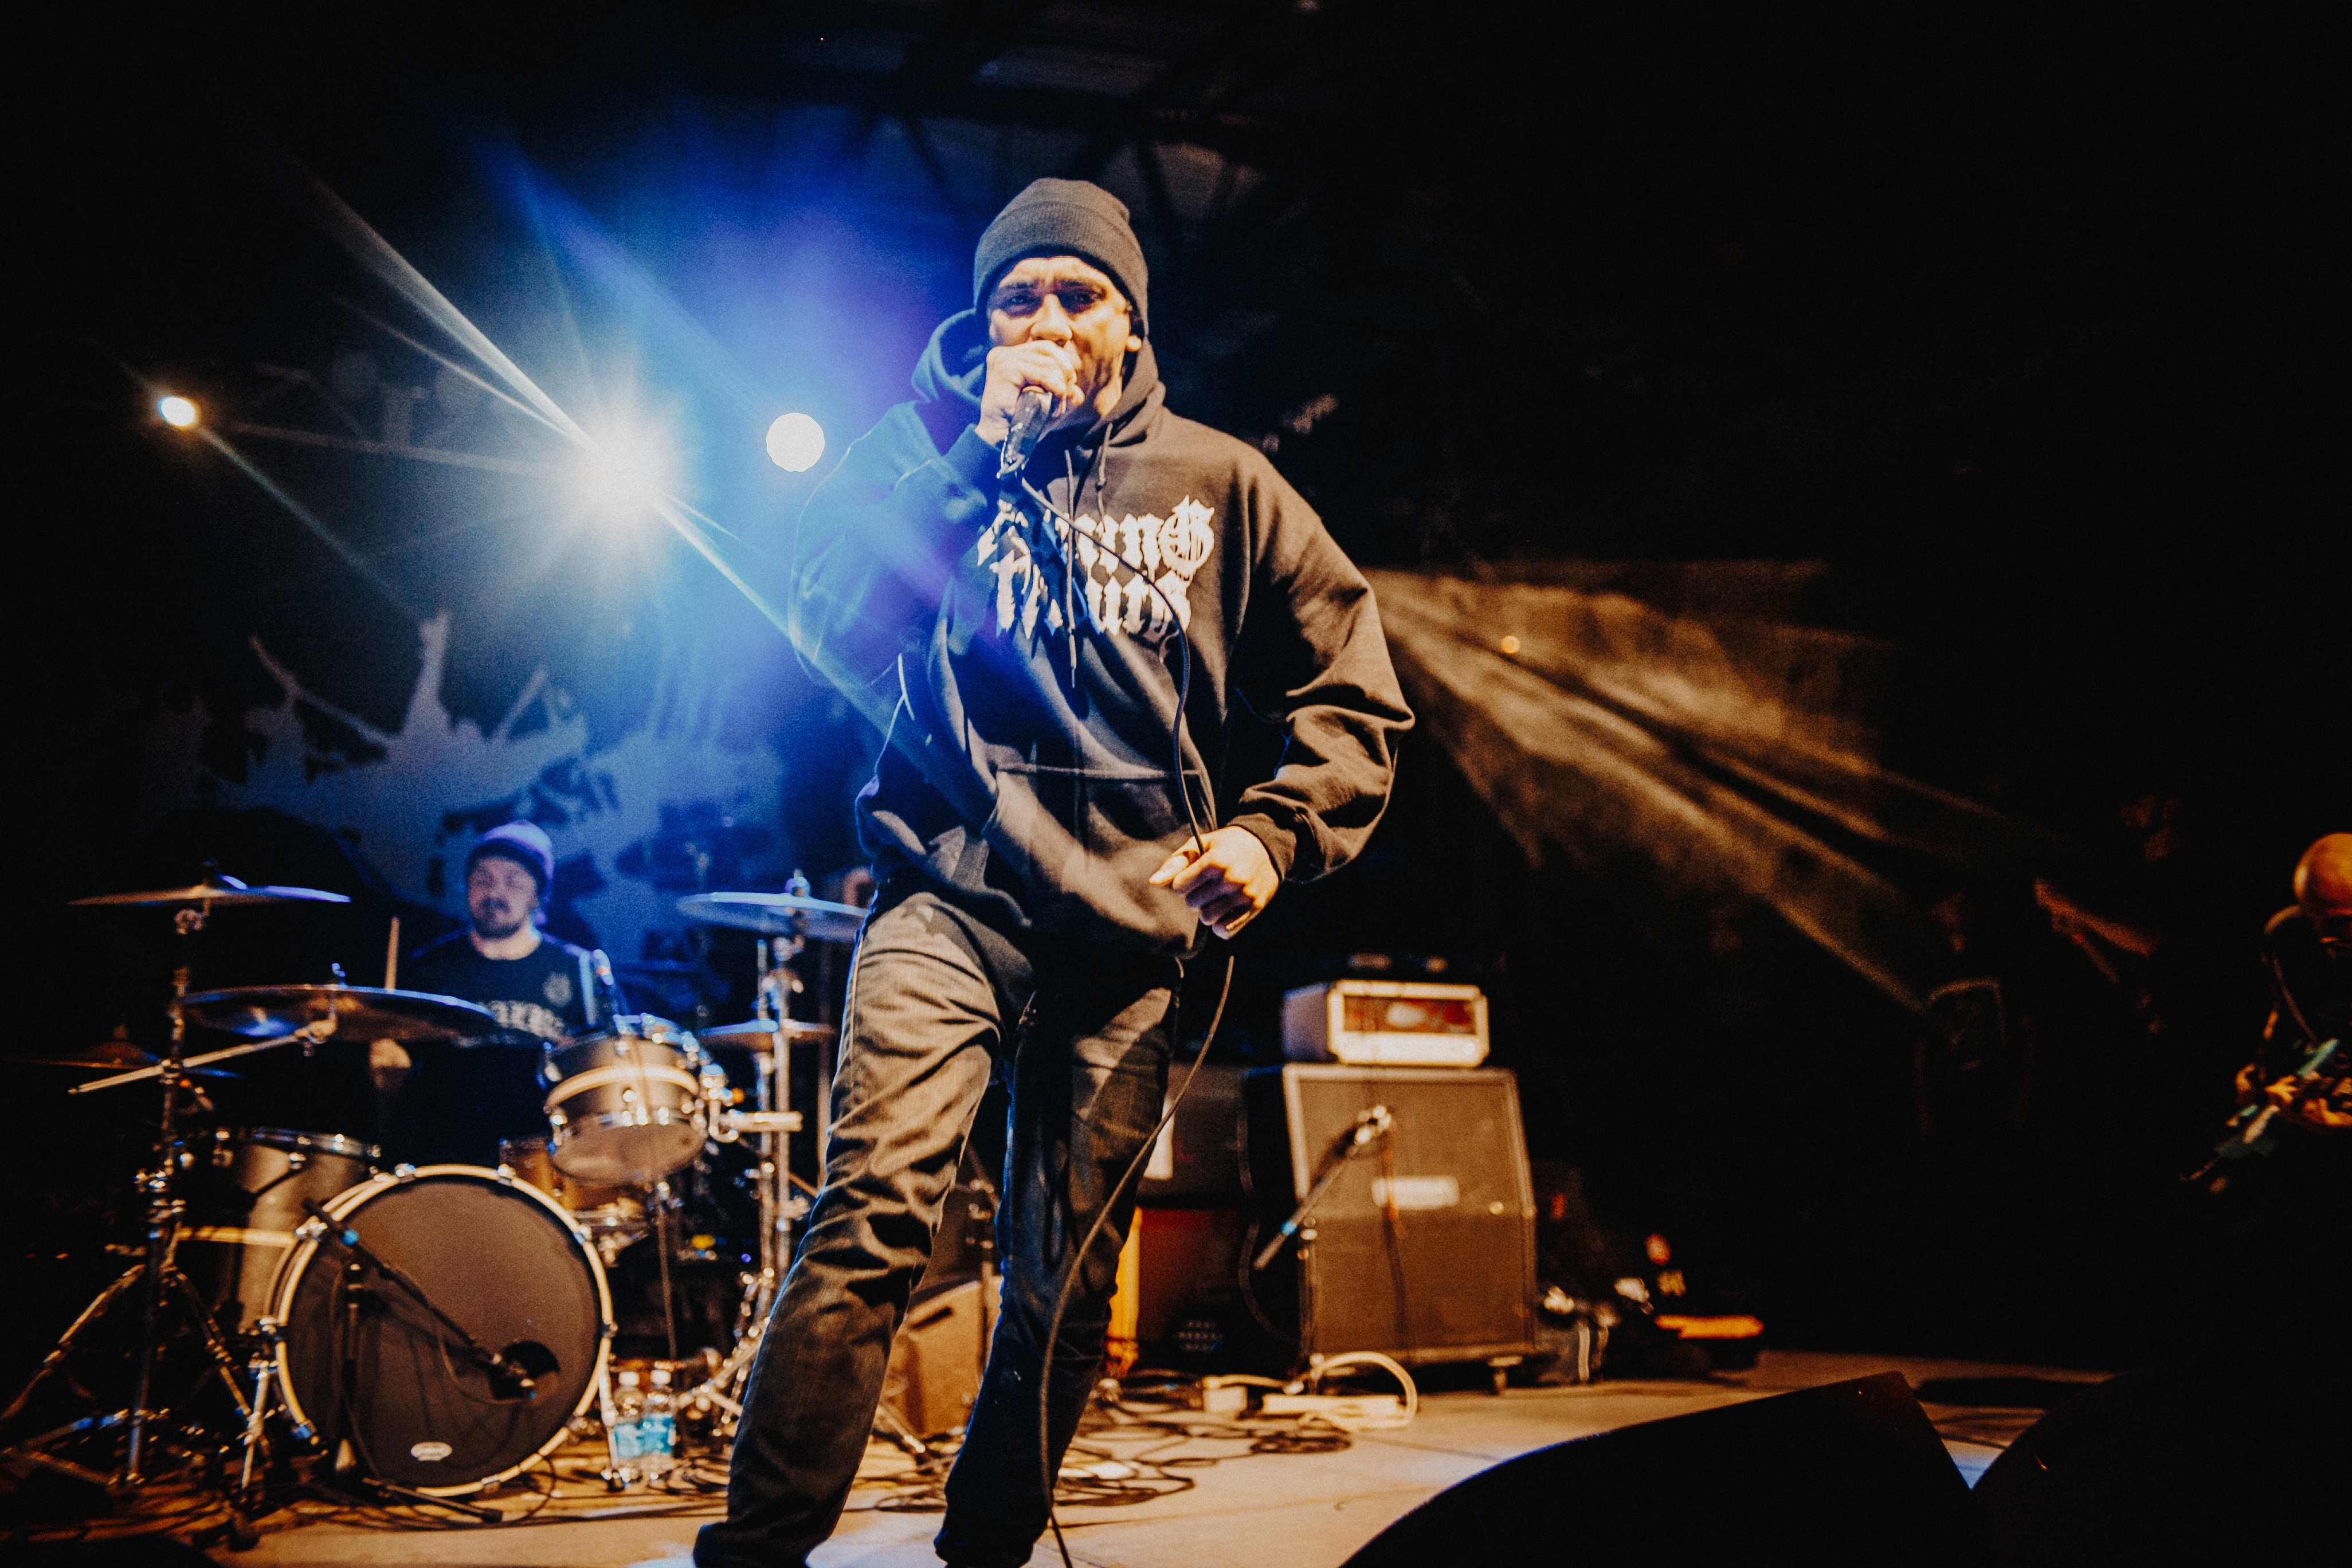 Every Time I Die’s Annual Christmas Show at Riverworks (12/16/17 ...